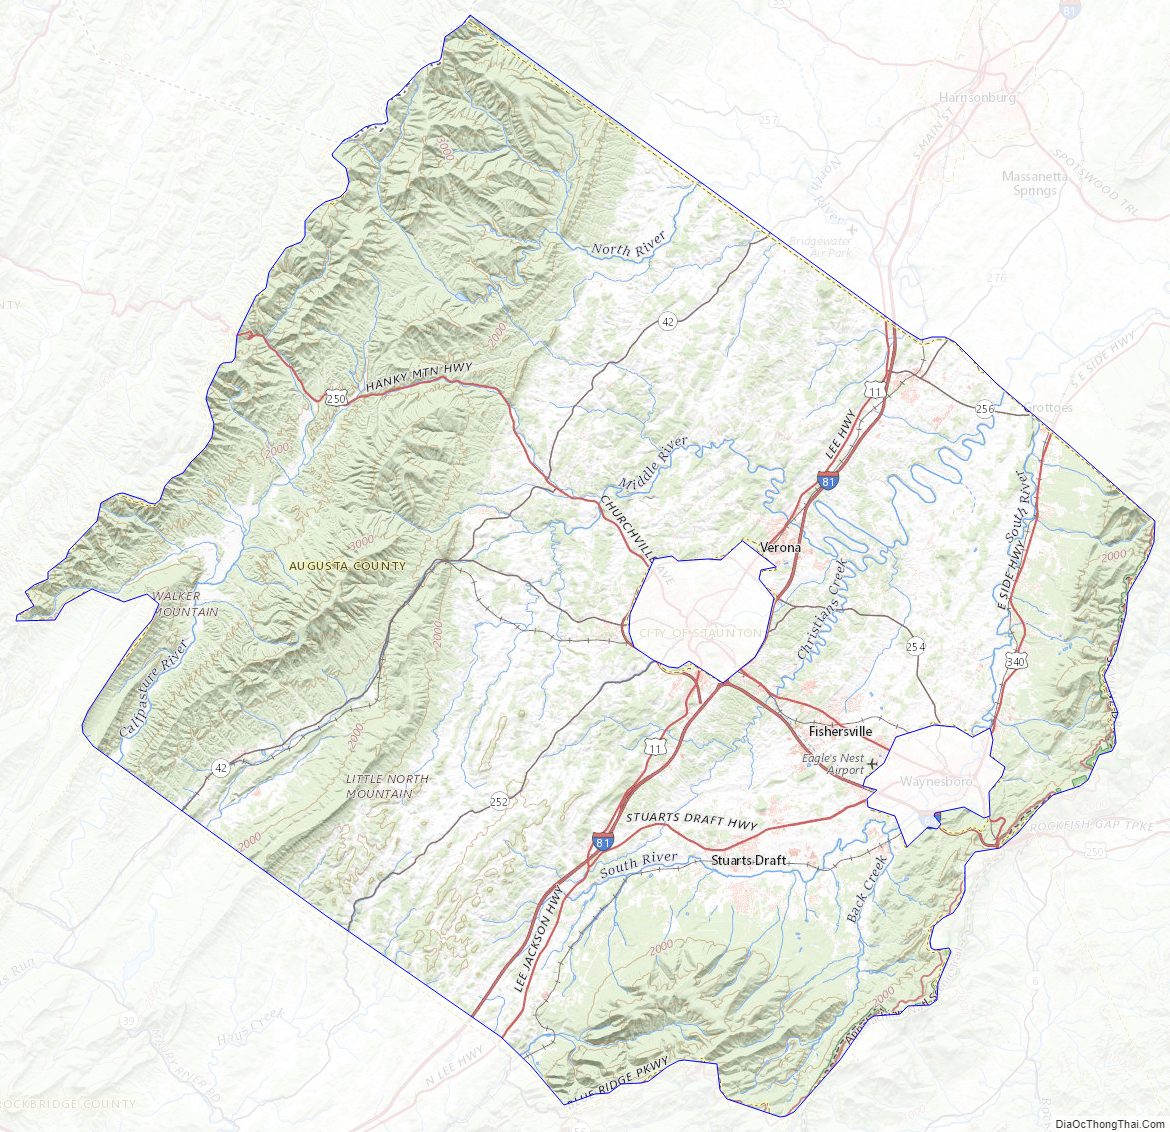 Topographic map of Augusta County, Virginia